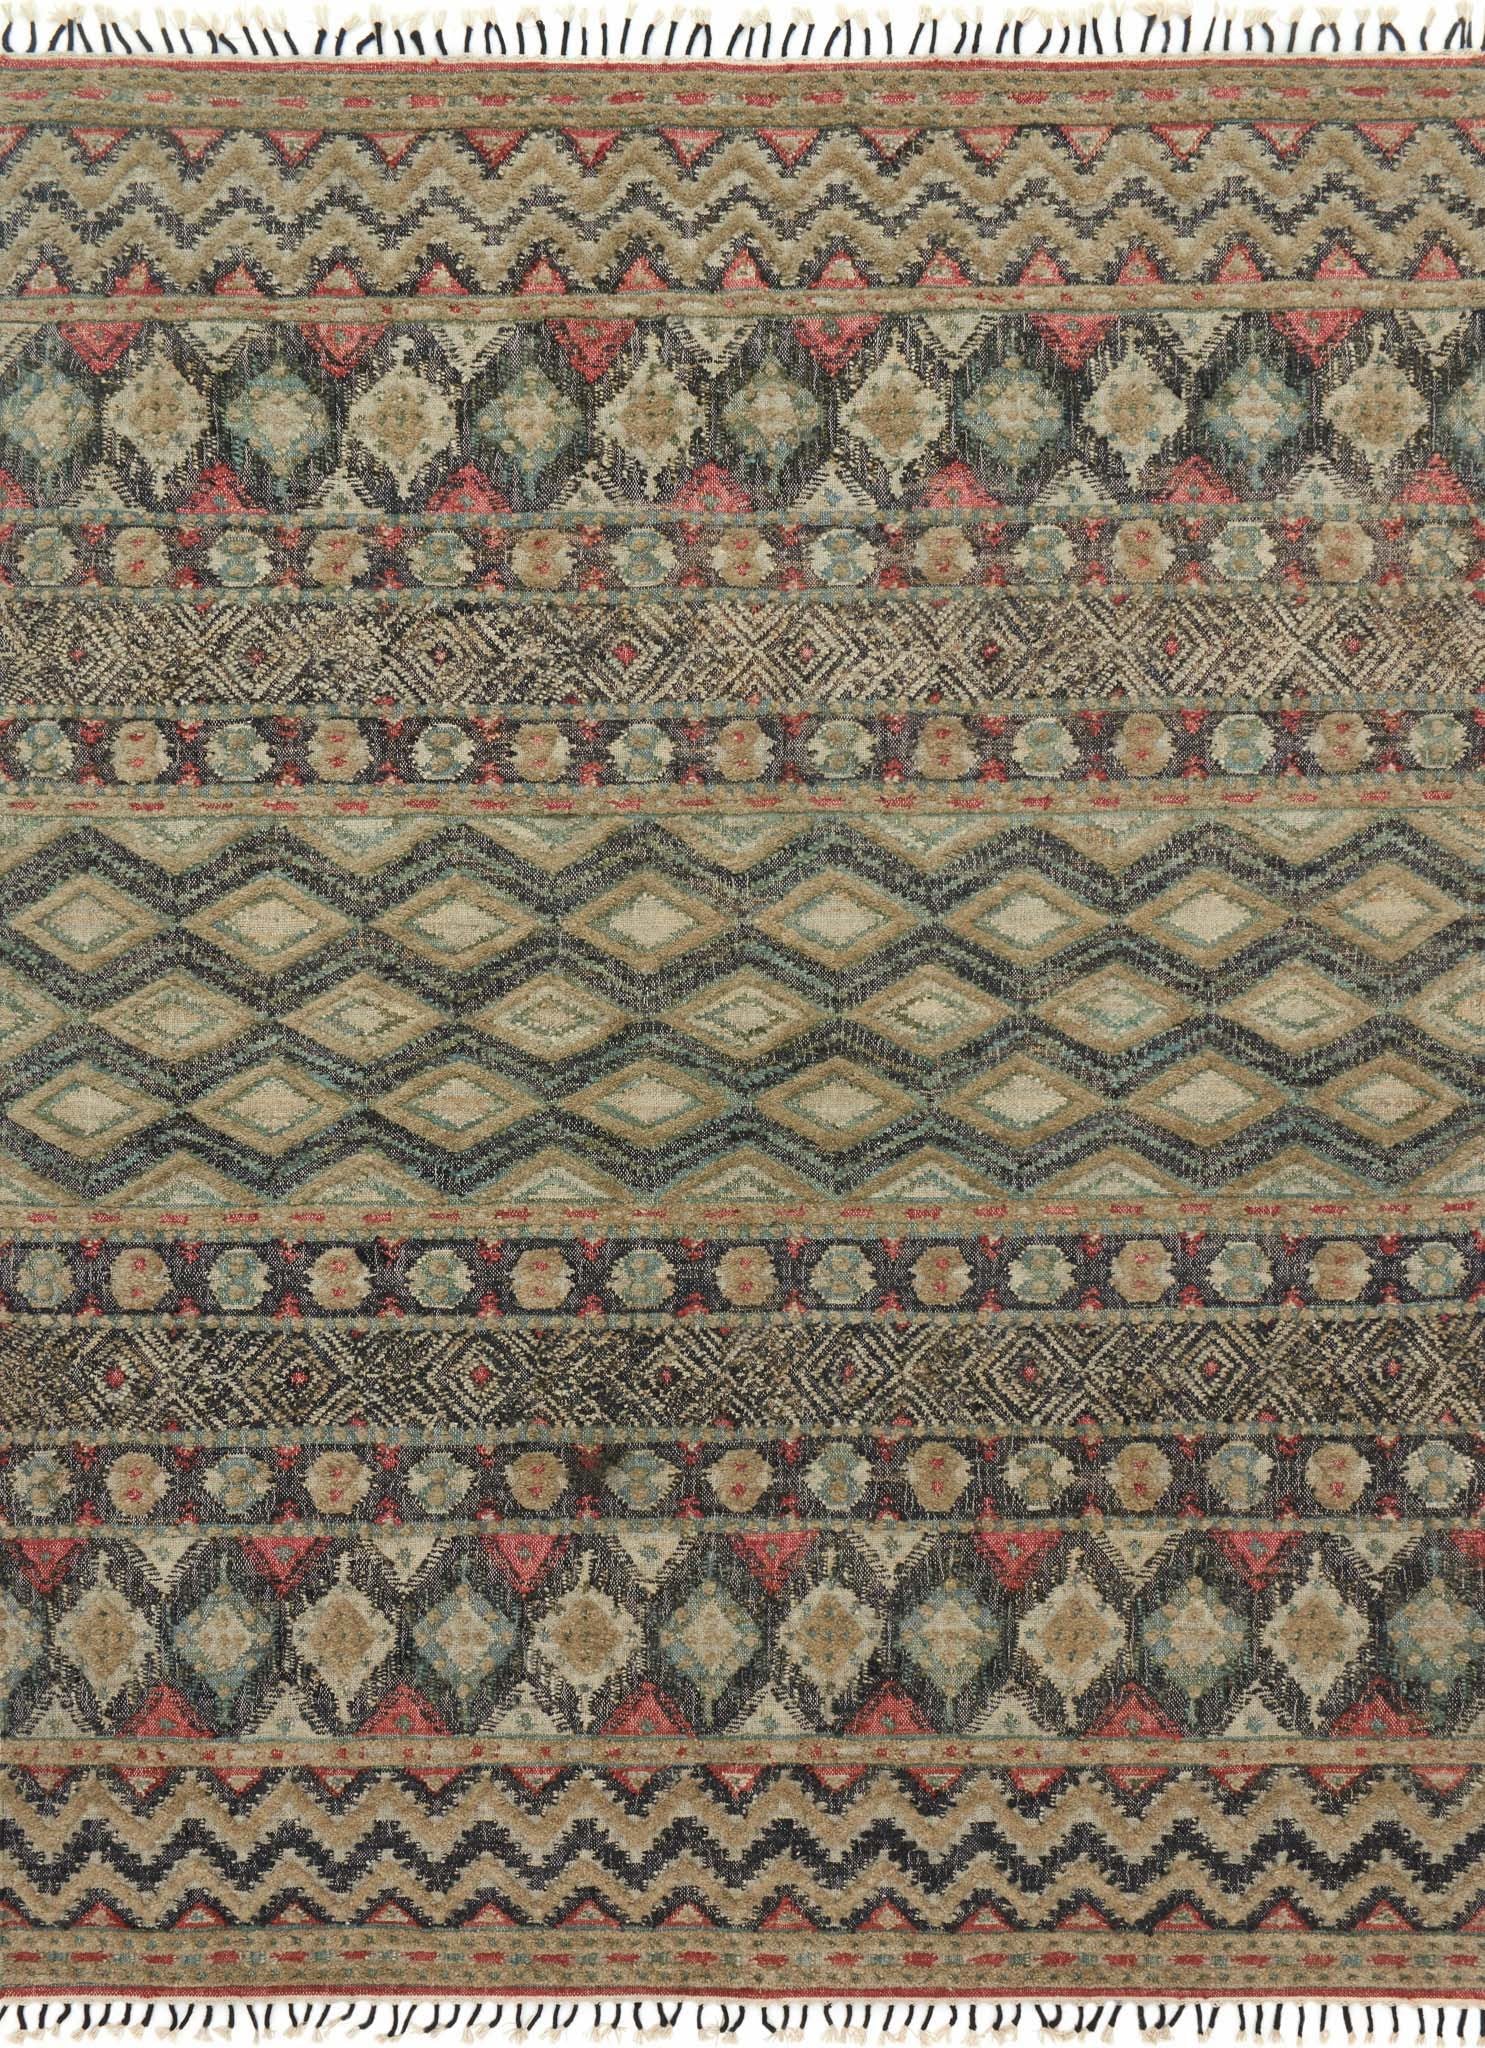 Hand-Knotted vs Hand-Woven Rug: What's the difference?